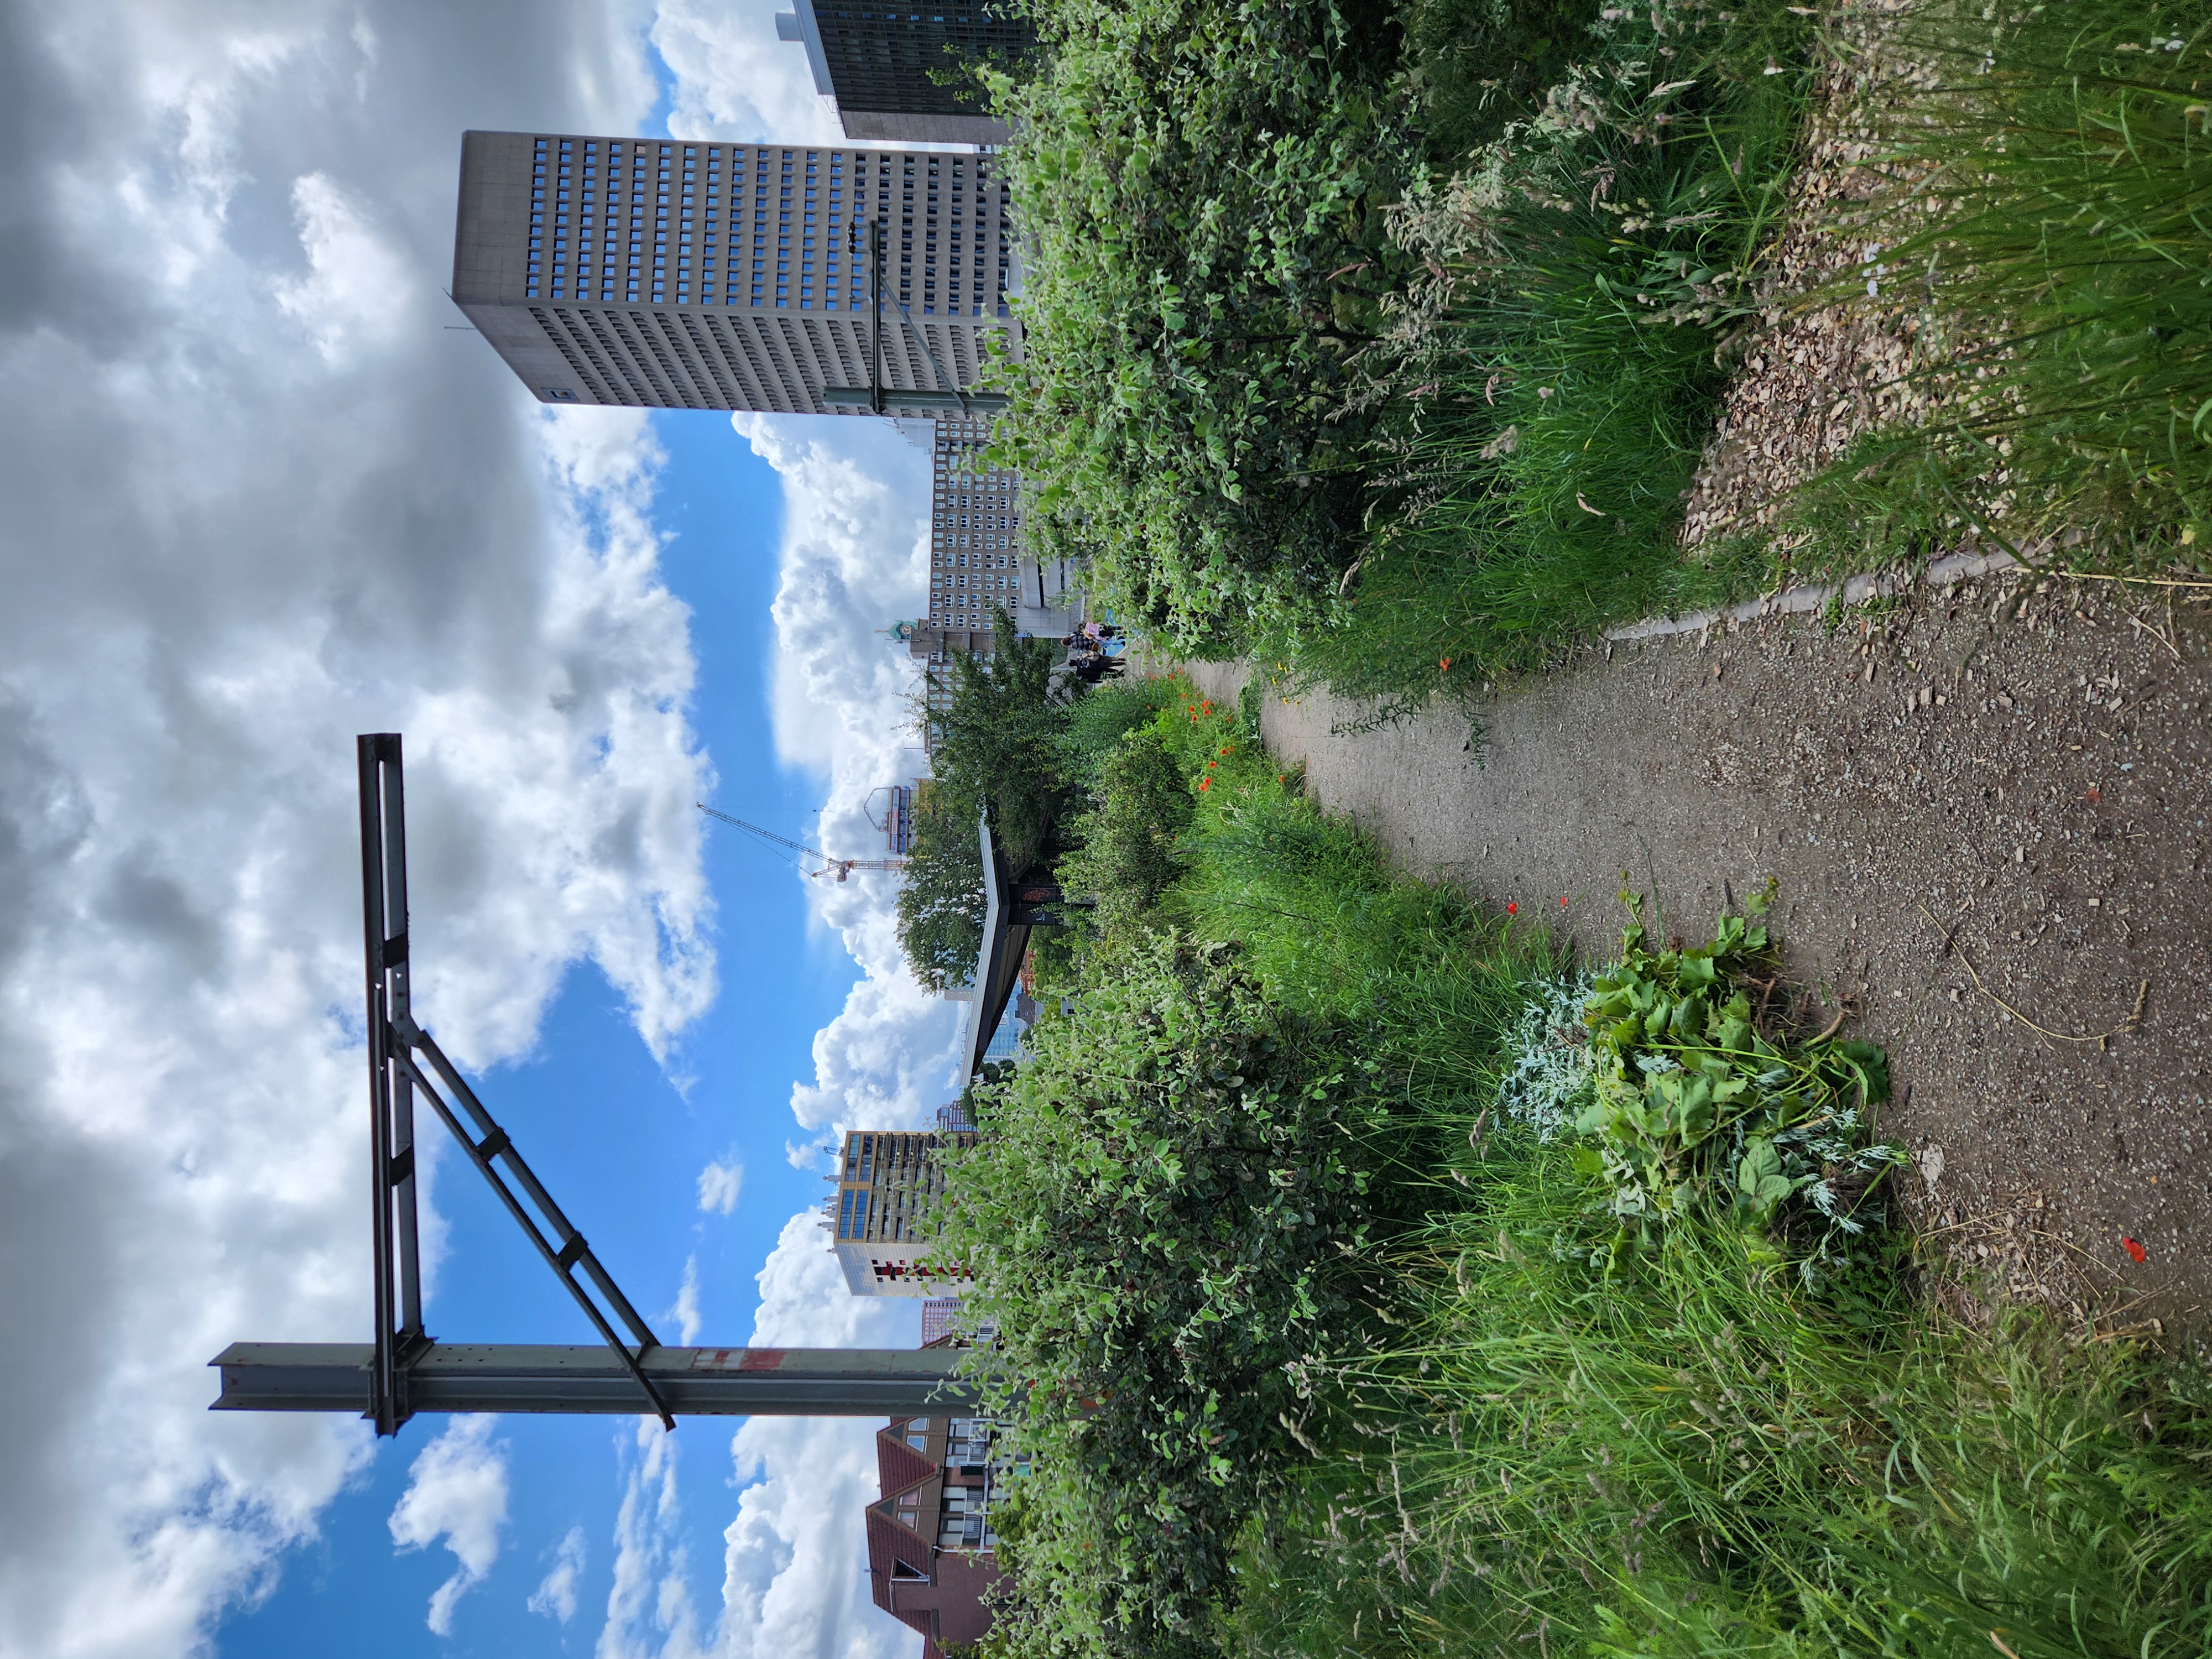 Luchtsingel, a highline style allotment garden on an old rail line, you can see the catenary pole in the foreground